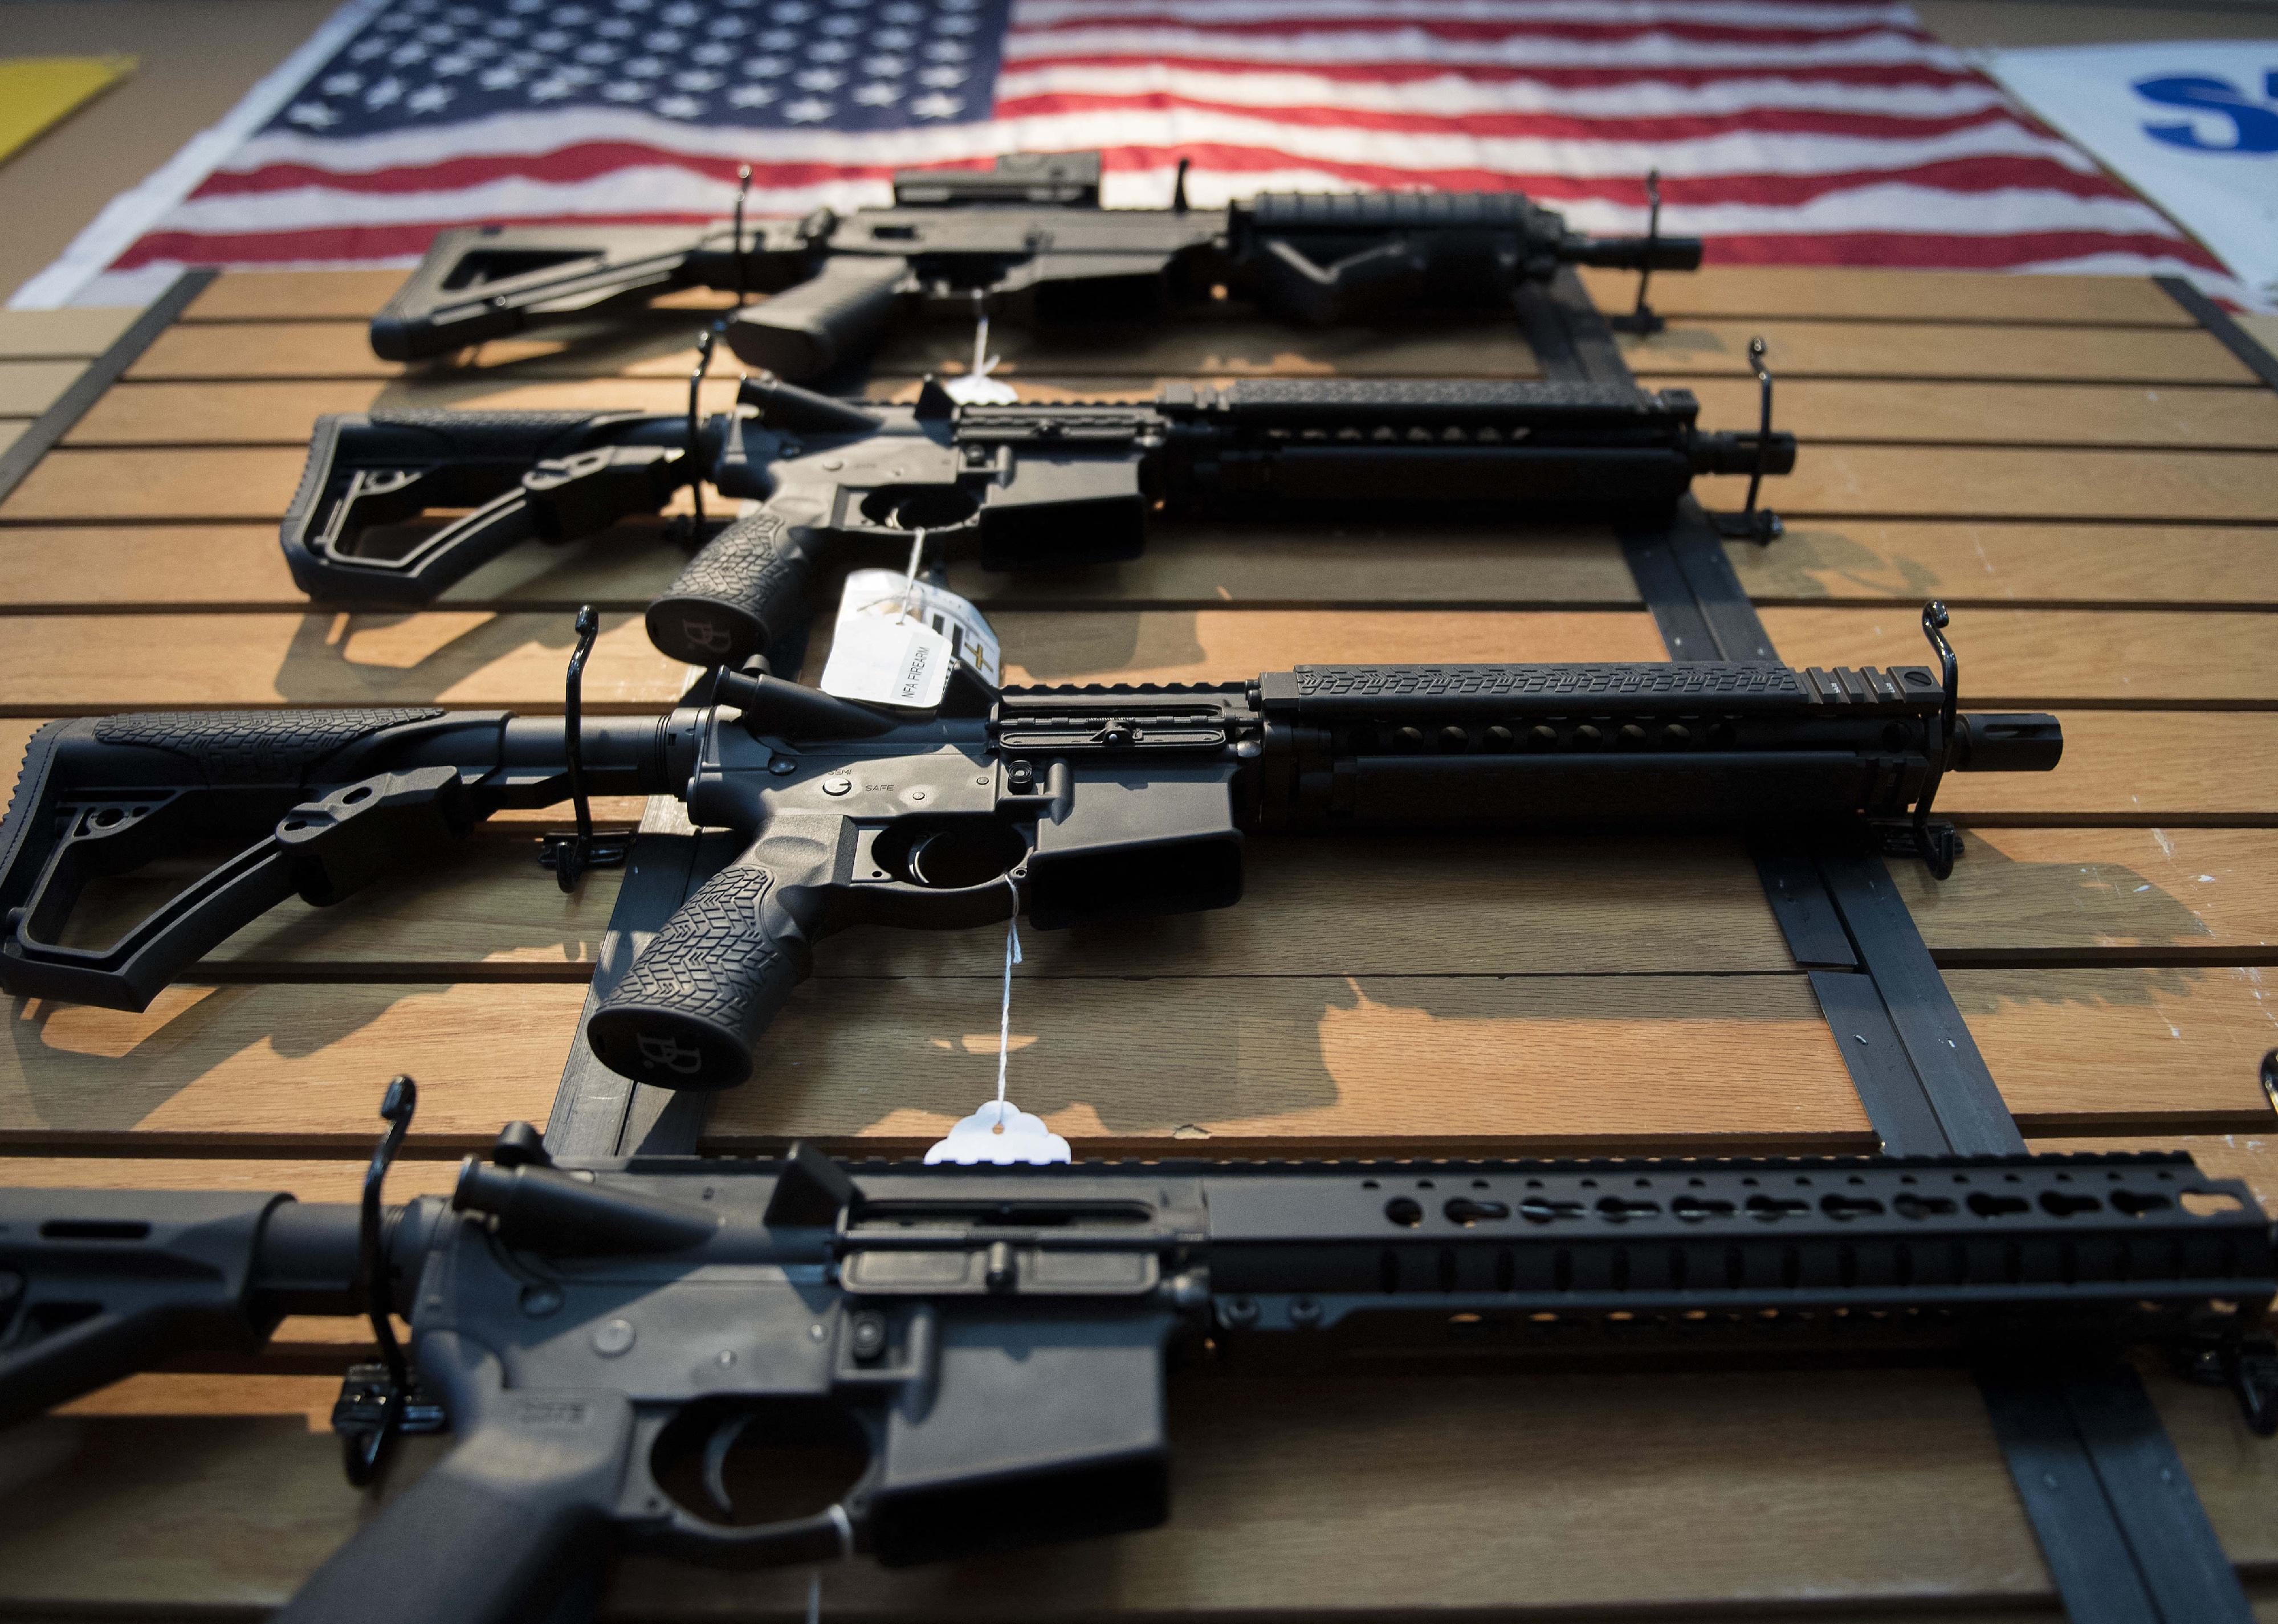 Assault rifles hang on the wall for sale at Blue Ridge Arsenal in Chantilly, Virginia.